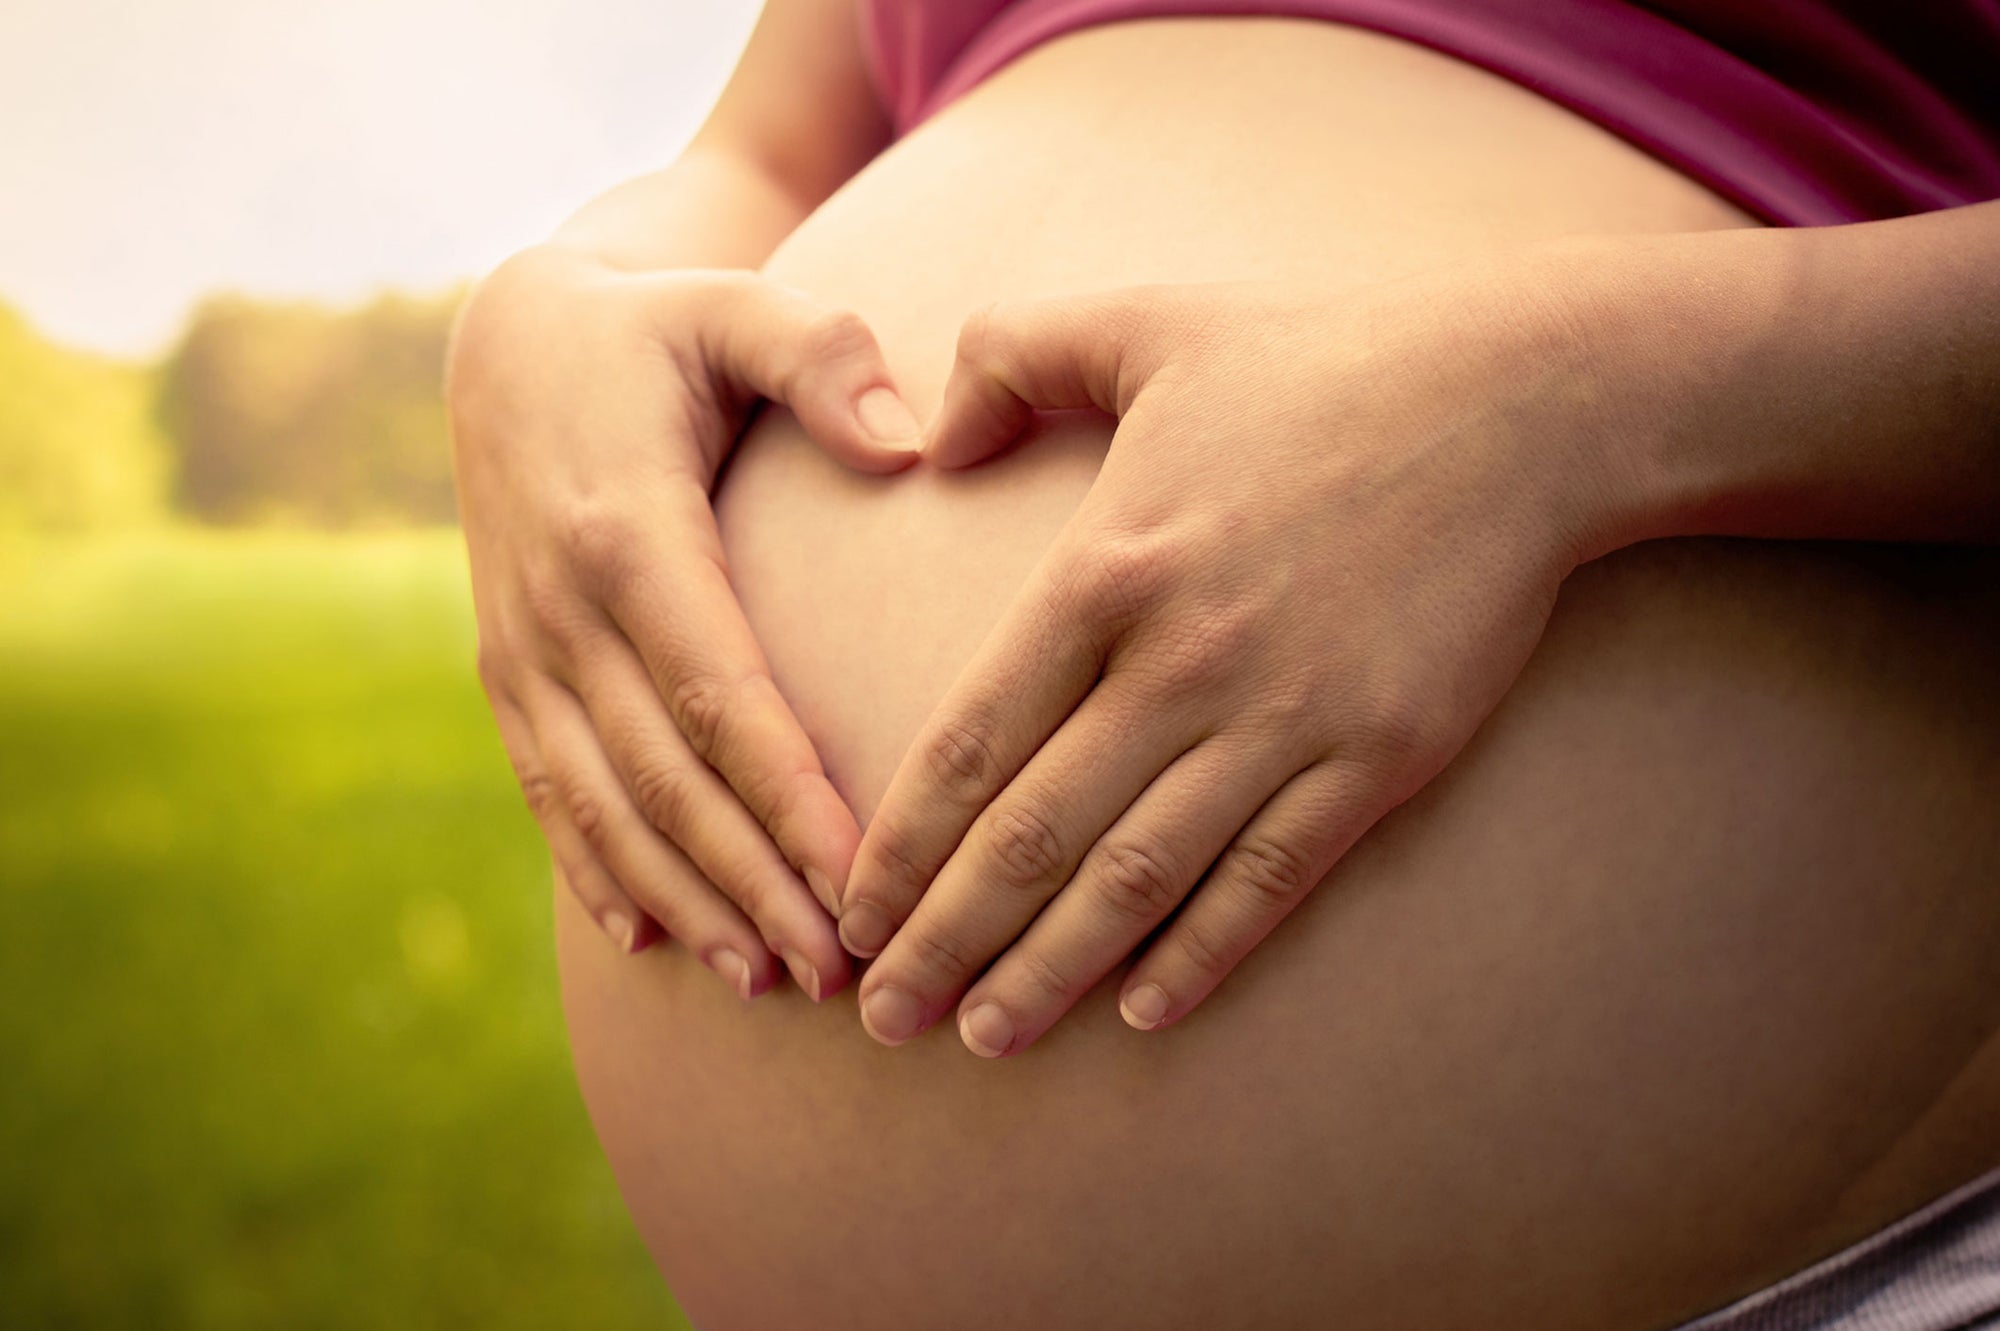 Pregnancy Safe Skin Care and Tips for a Pleasurable Pregnancy